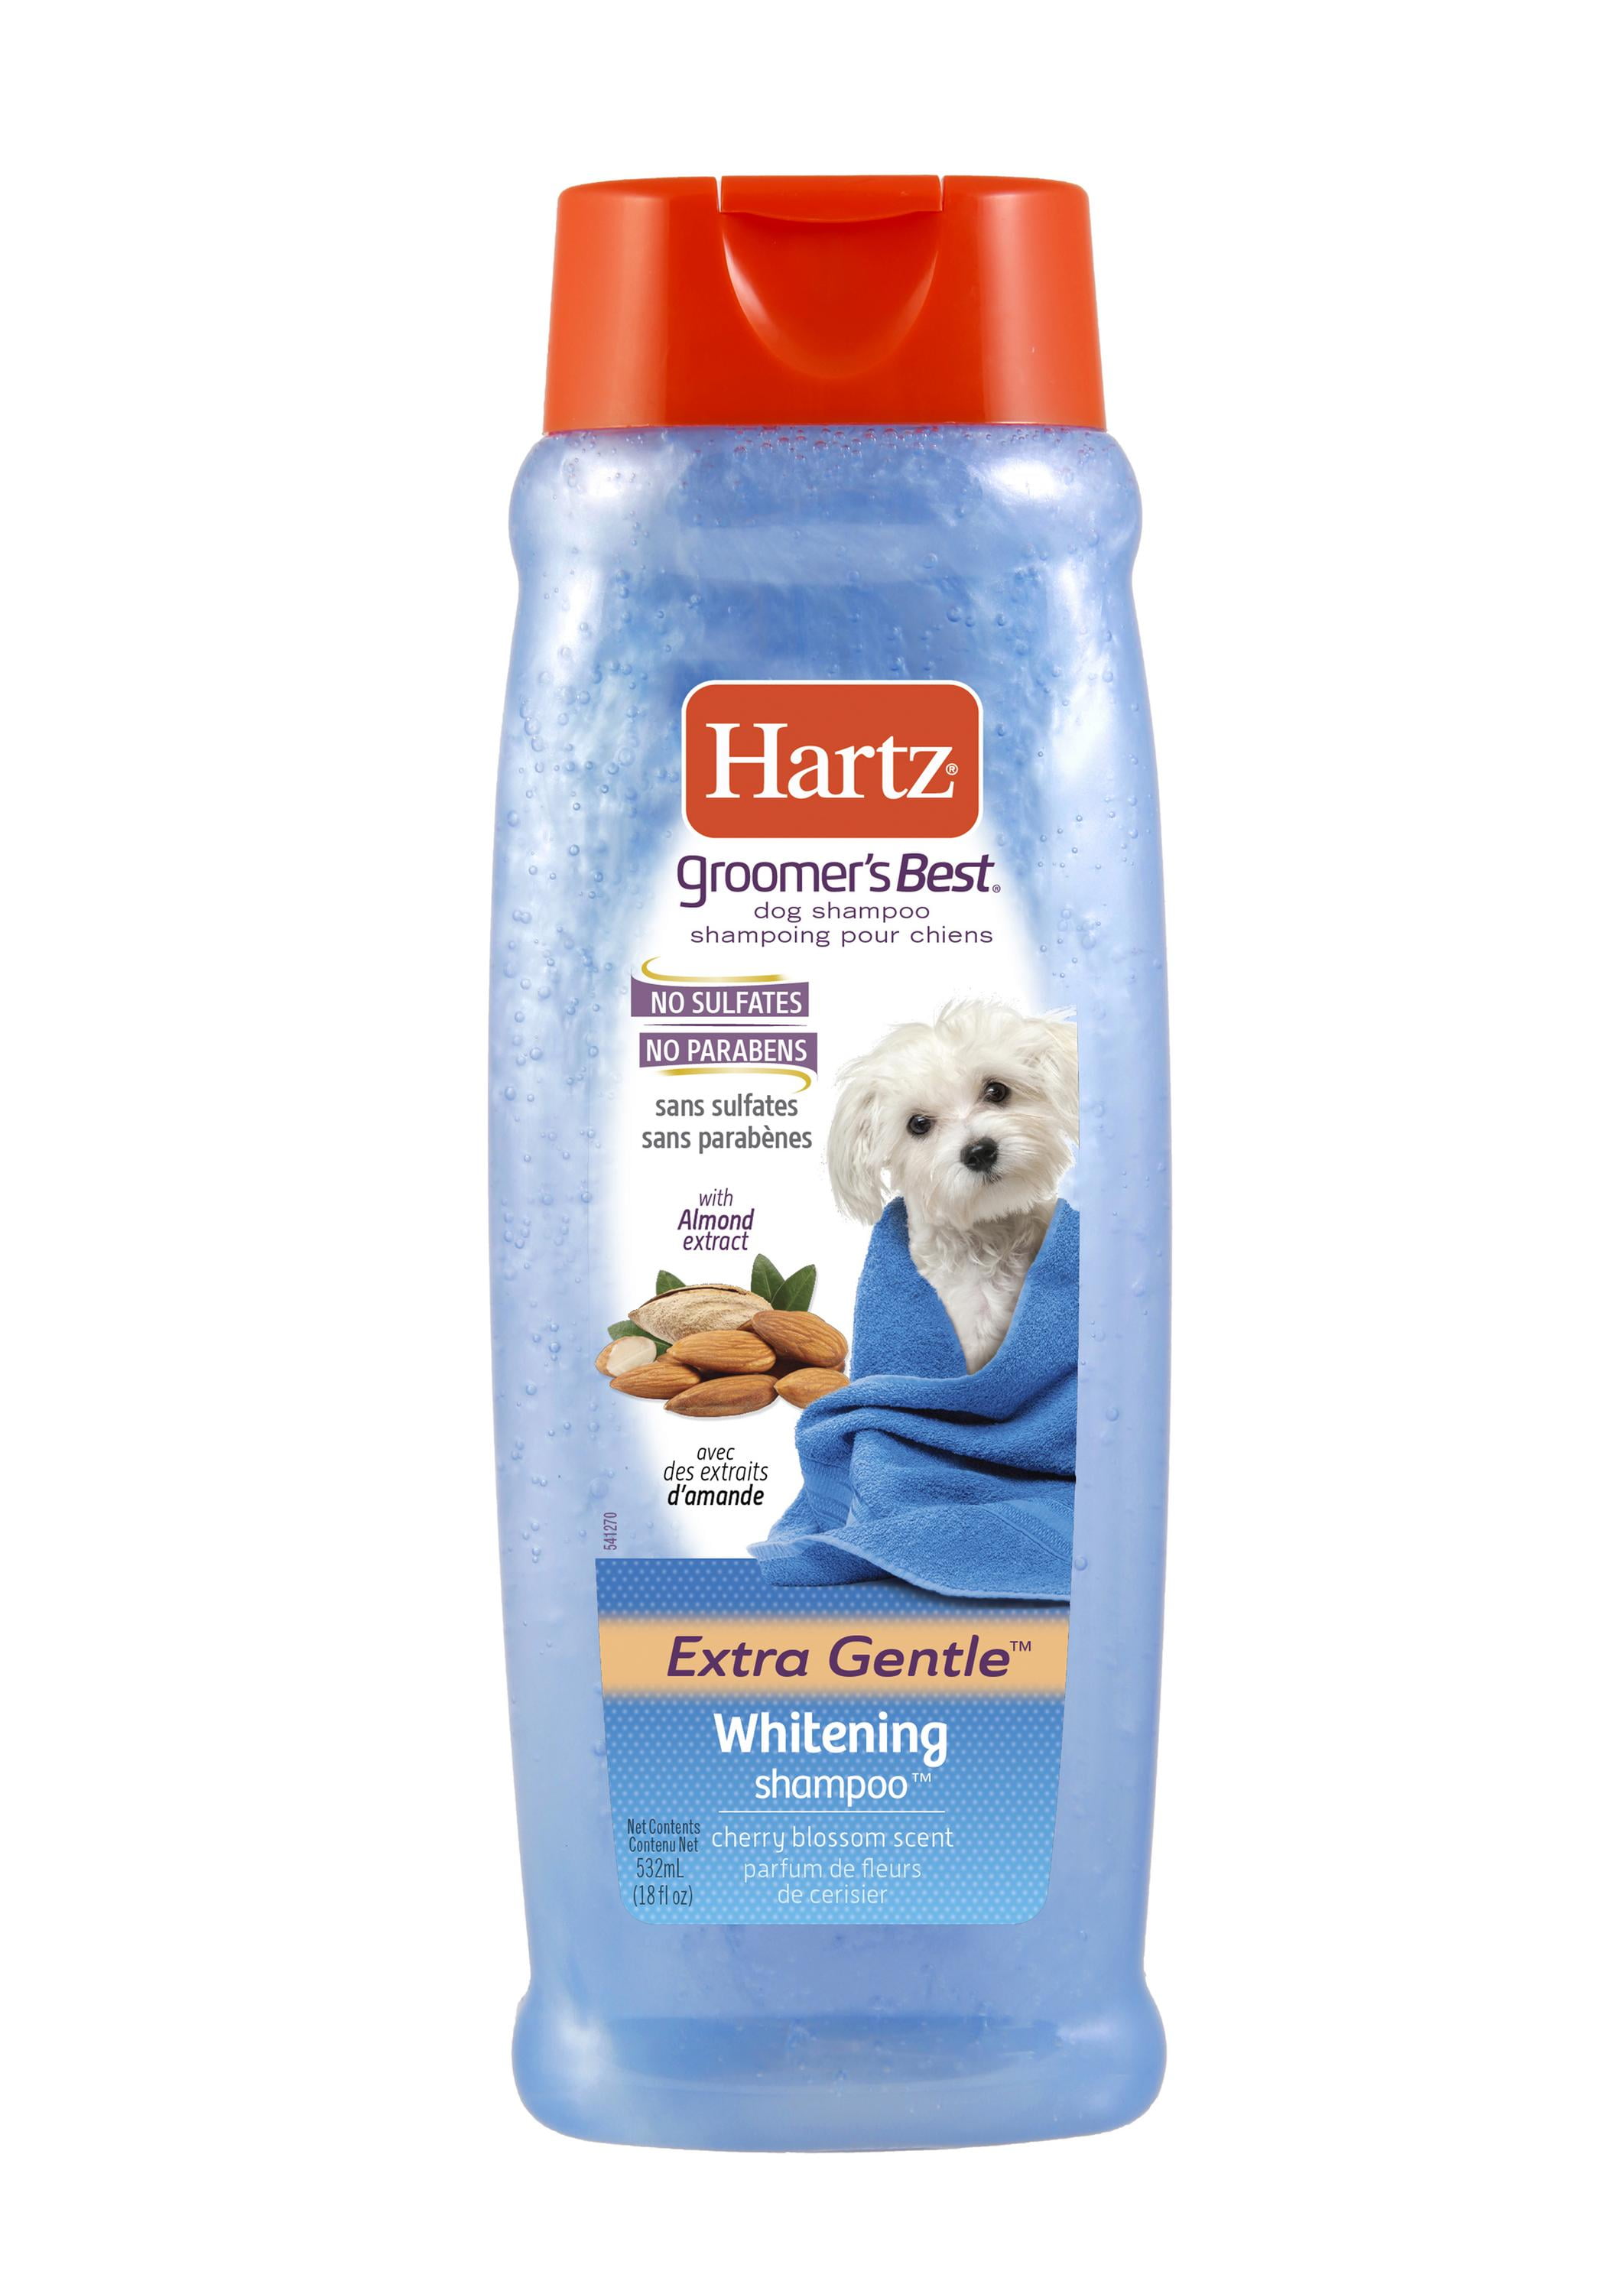 The Ultimate Buying Guide for Dog Shampoo: Top 10 Products to Keep Your ...